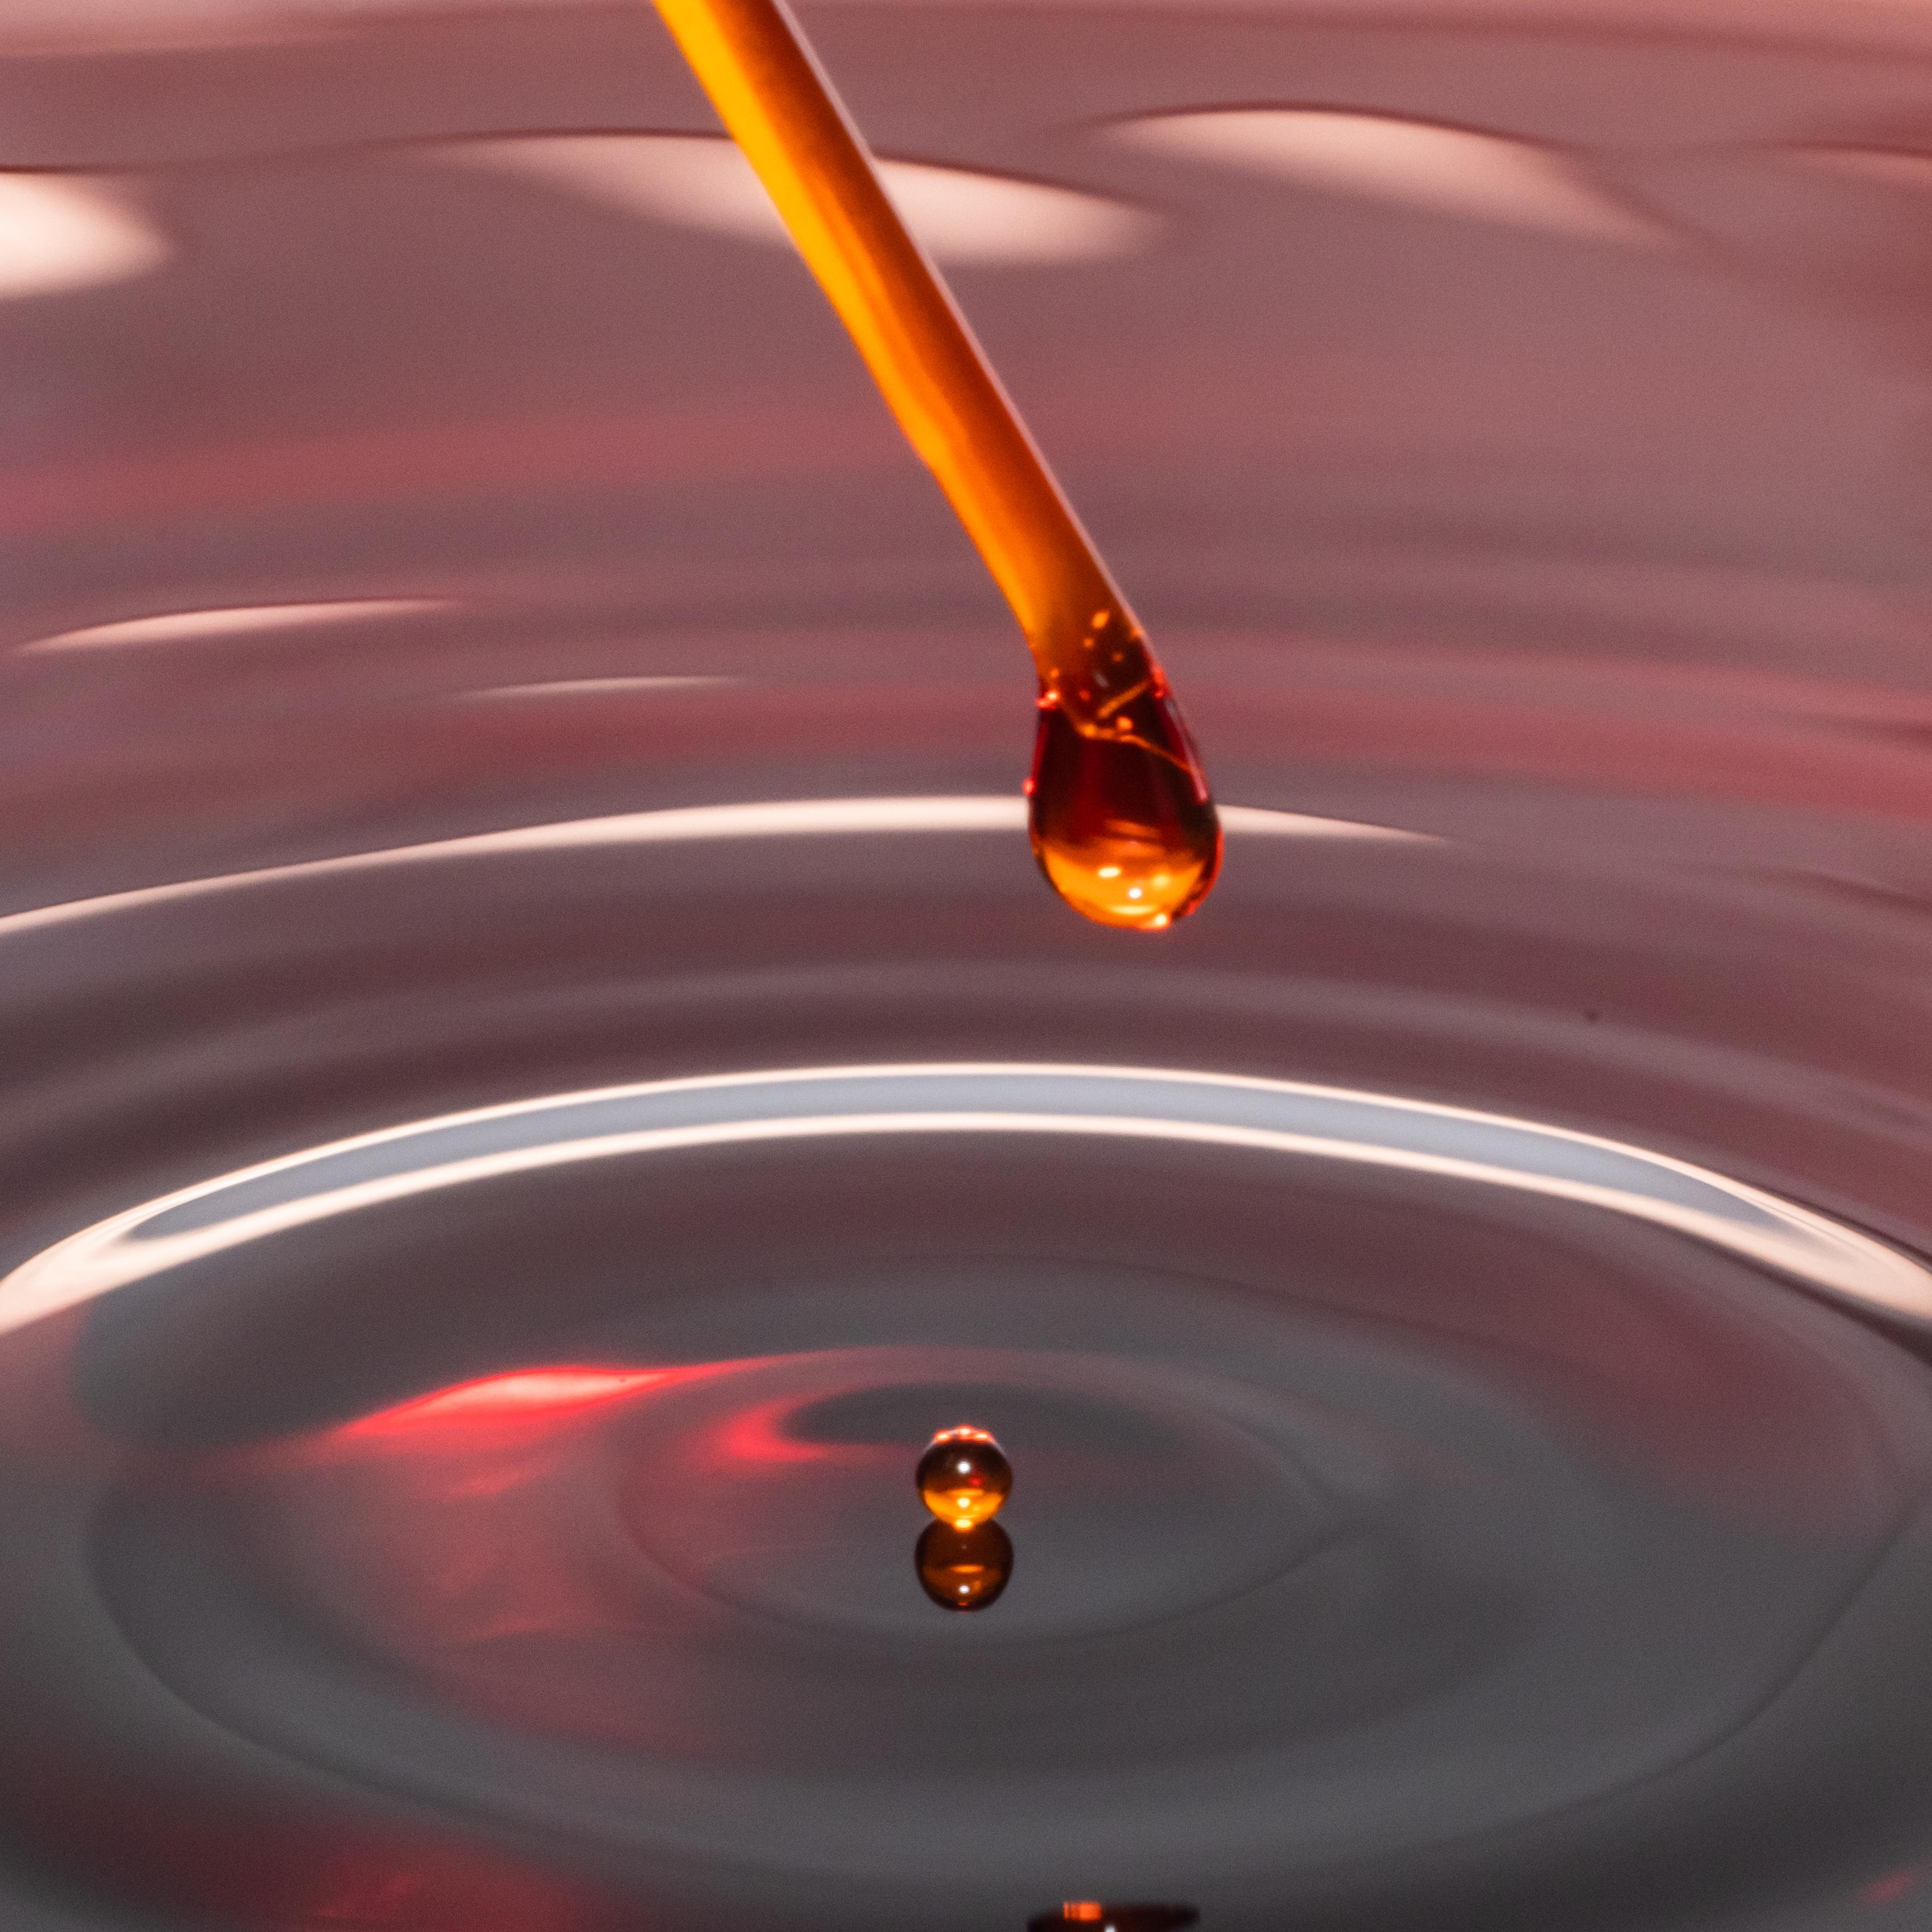 Red droplet from pipette creating waves.